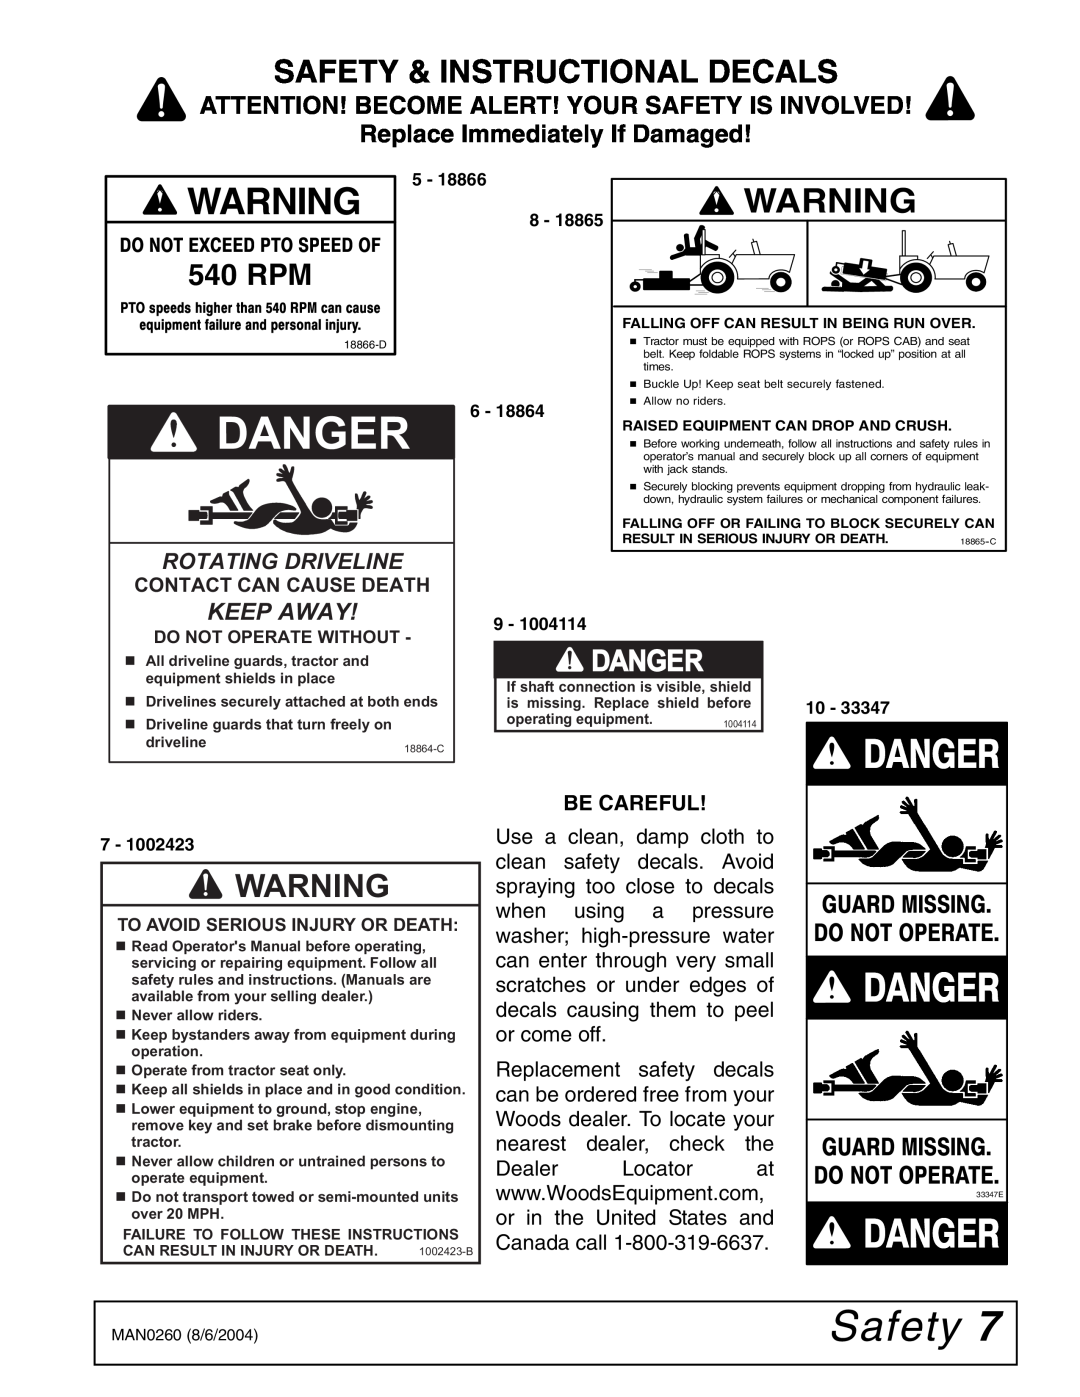 Woods Equipment RDC54, RD60, RD72 manual Be Careful, Danger, Safety & Instructional Decals, 33347E, Rotating Driveline 